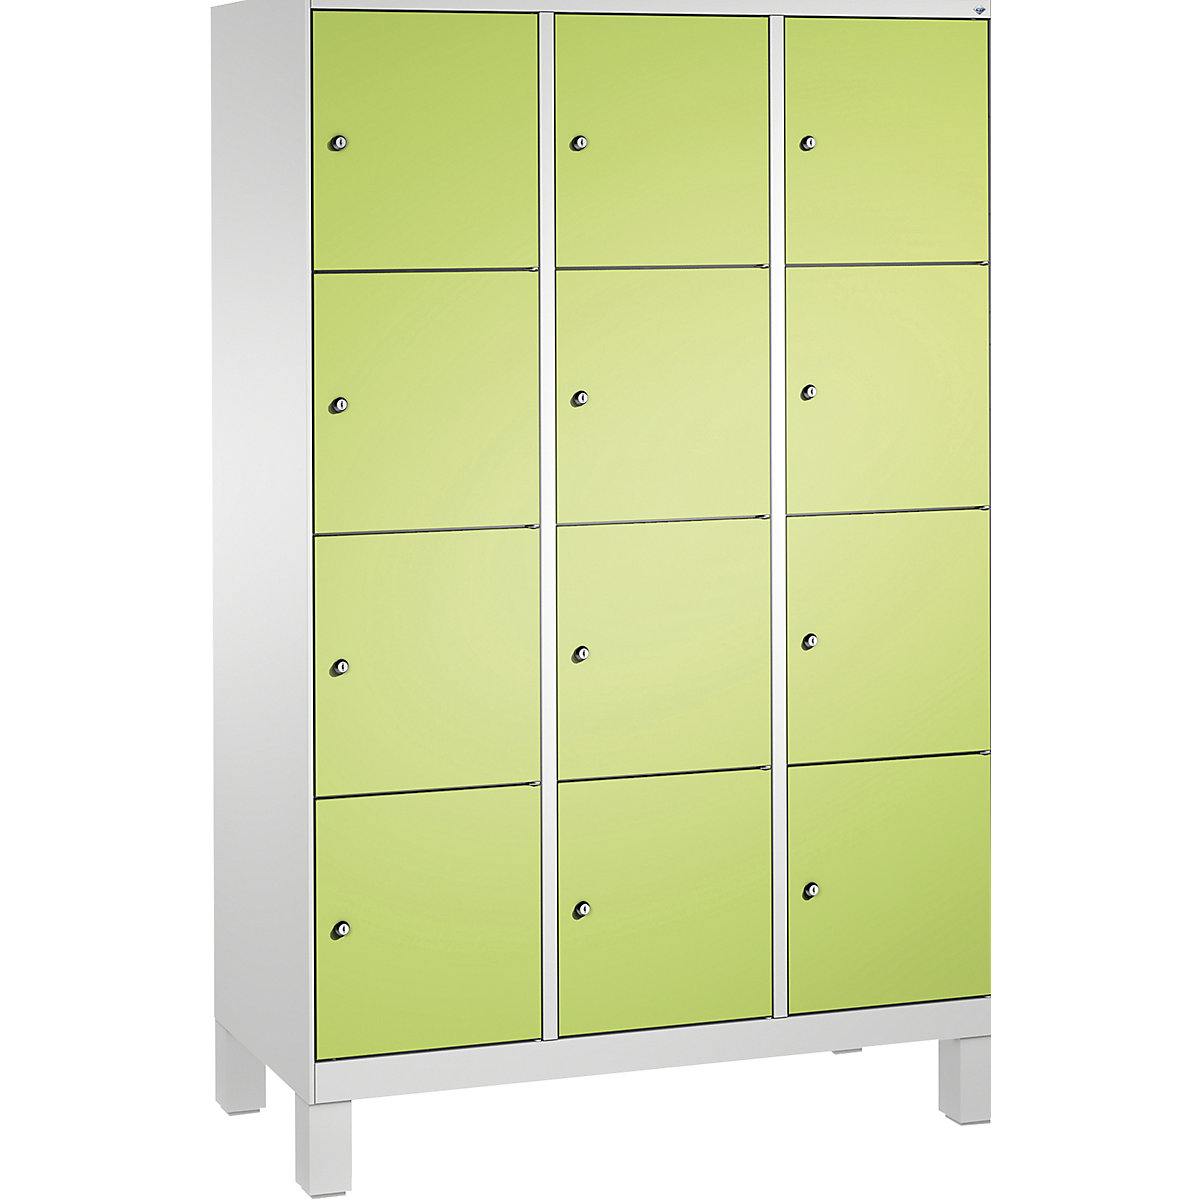 EVOLO locker unit, with feet – C+P, 3 compartments, 4 shelf compartments each, compartment width 400 mm, light grey / viridian green-15